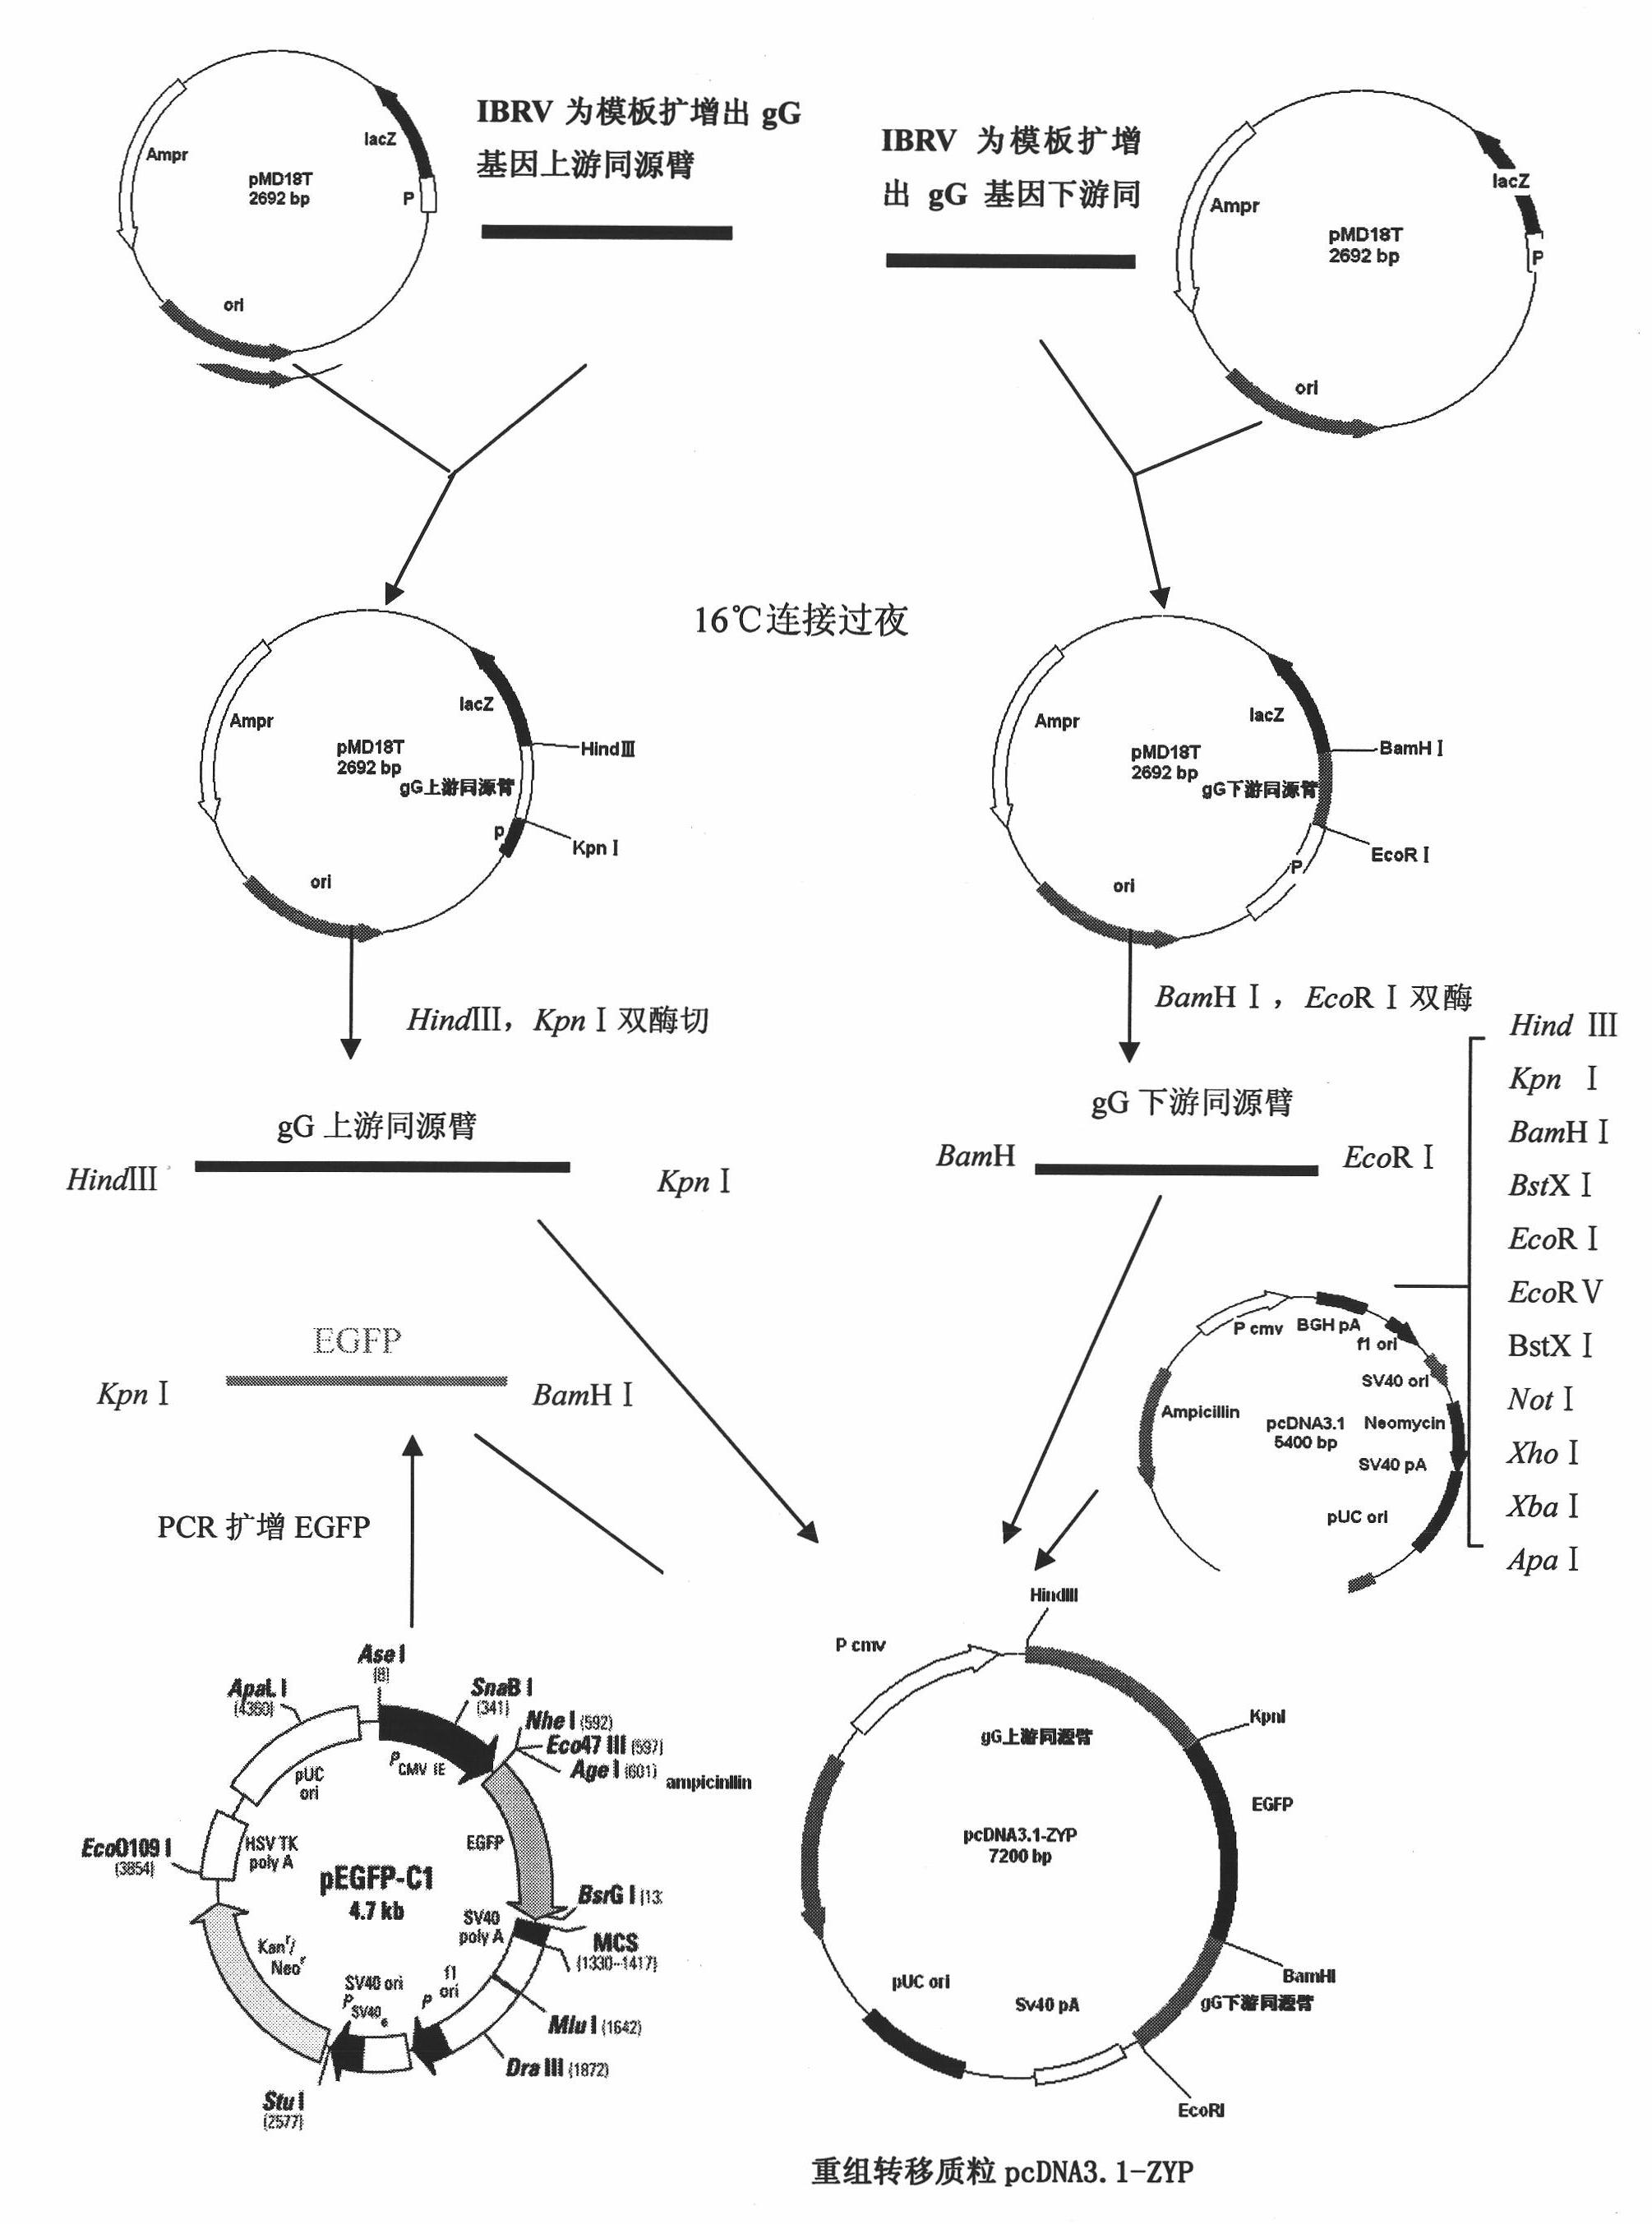 gg and TK gene-deleted recombinant infectious bovine rhinotracheitis virus and application